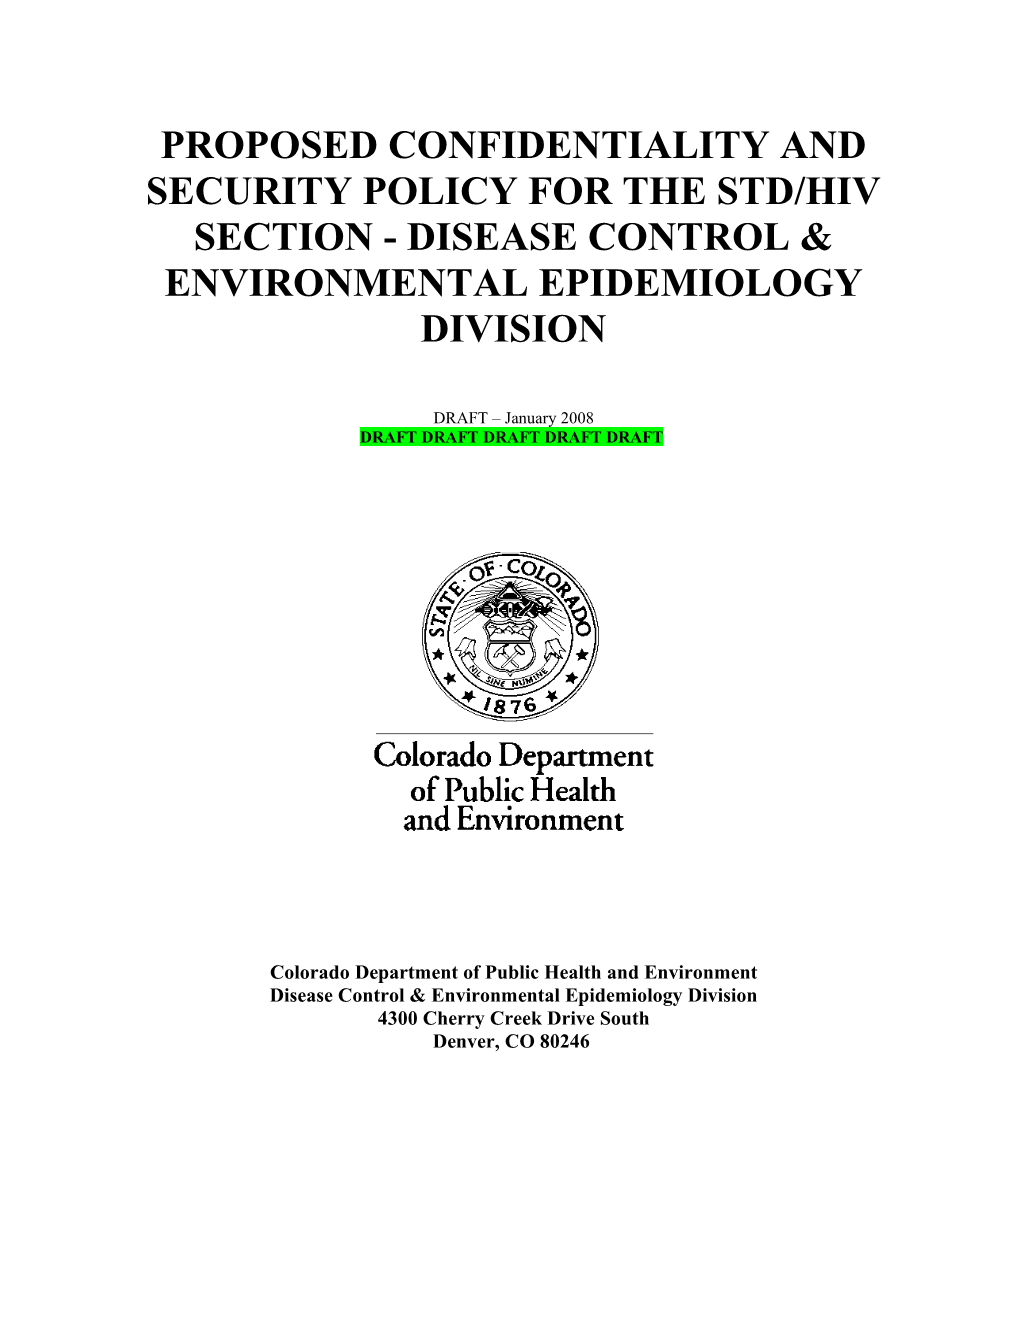 Proposed Confidentiality and Security Policy for the Std/Hiv Section - Disease Control